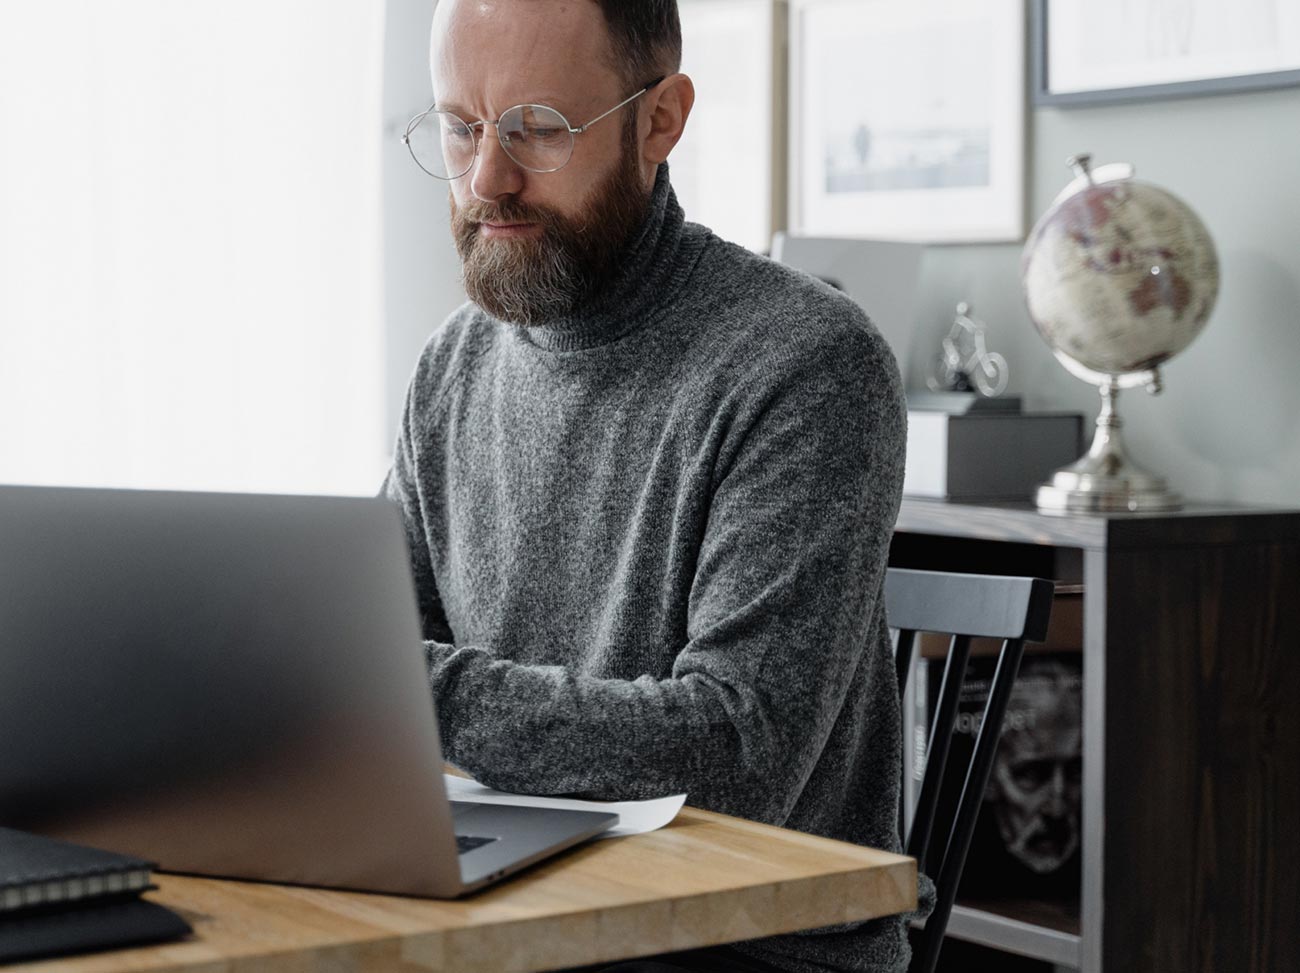 Man wearing glasses and working on laptop